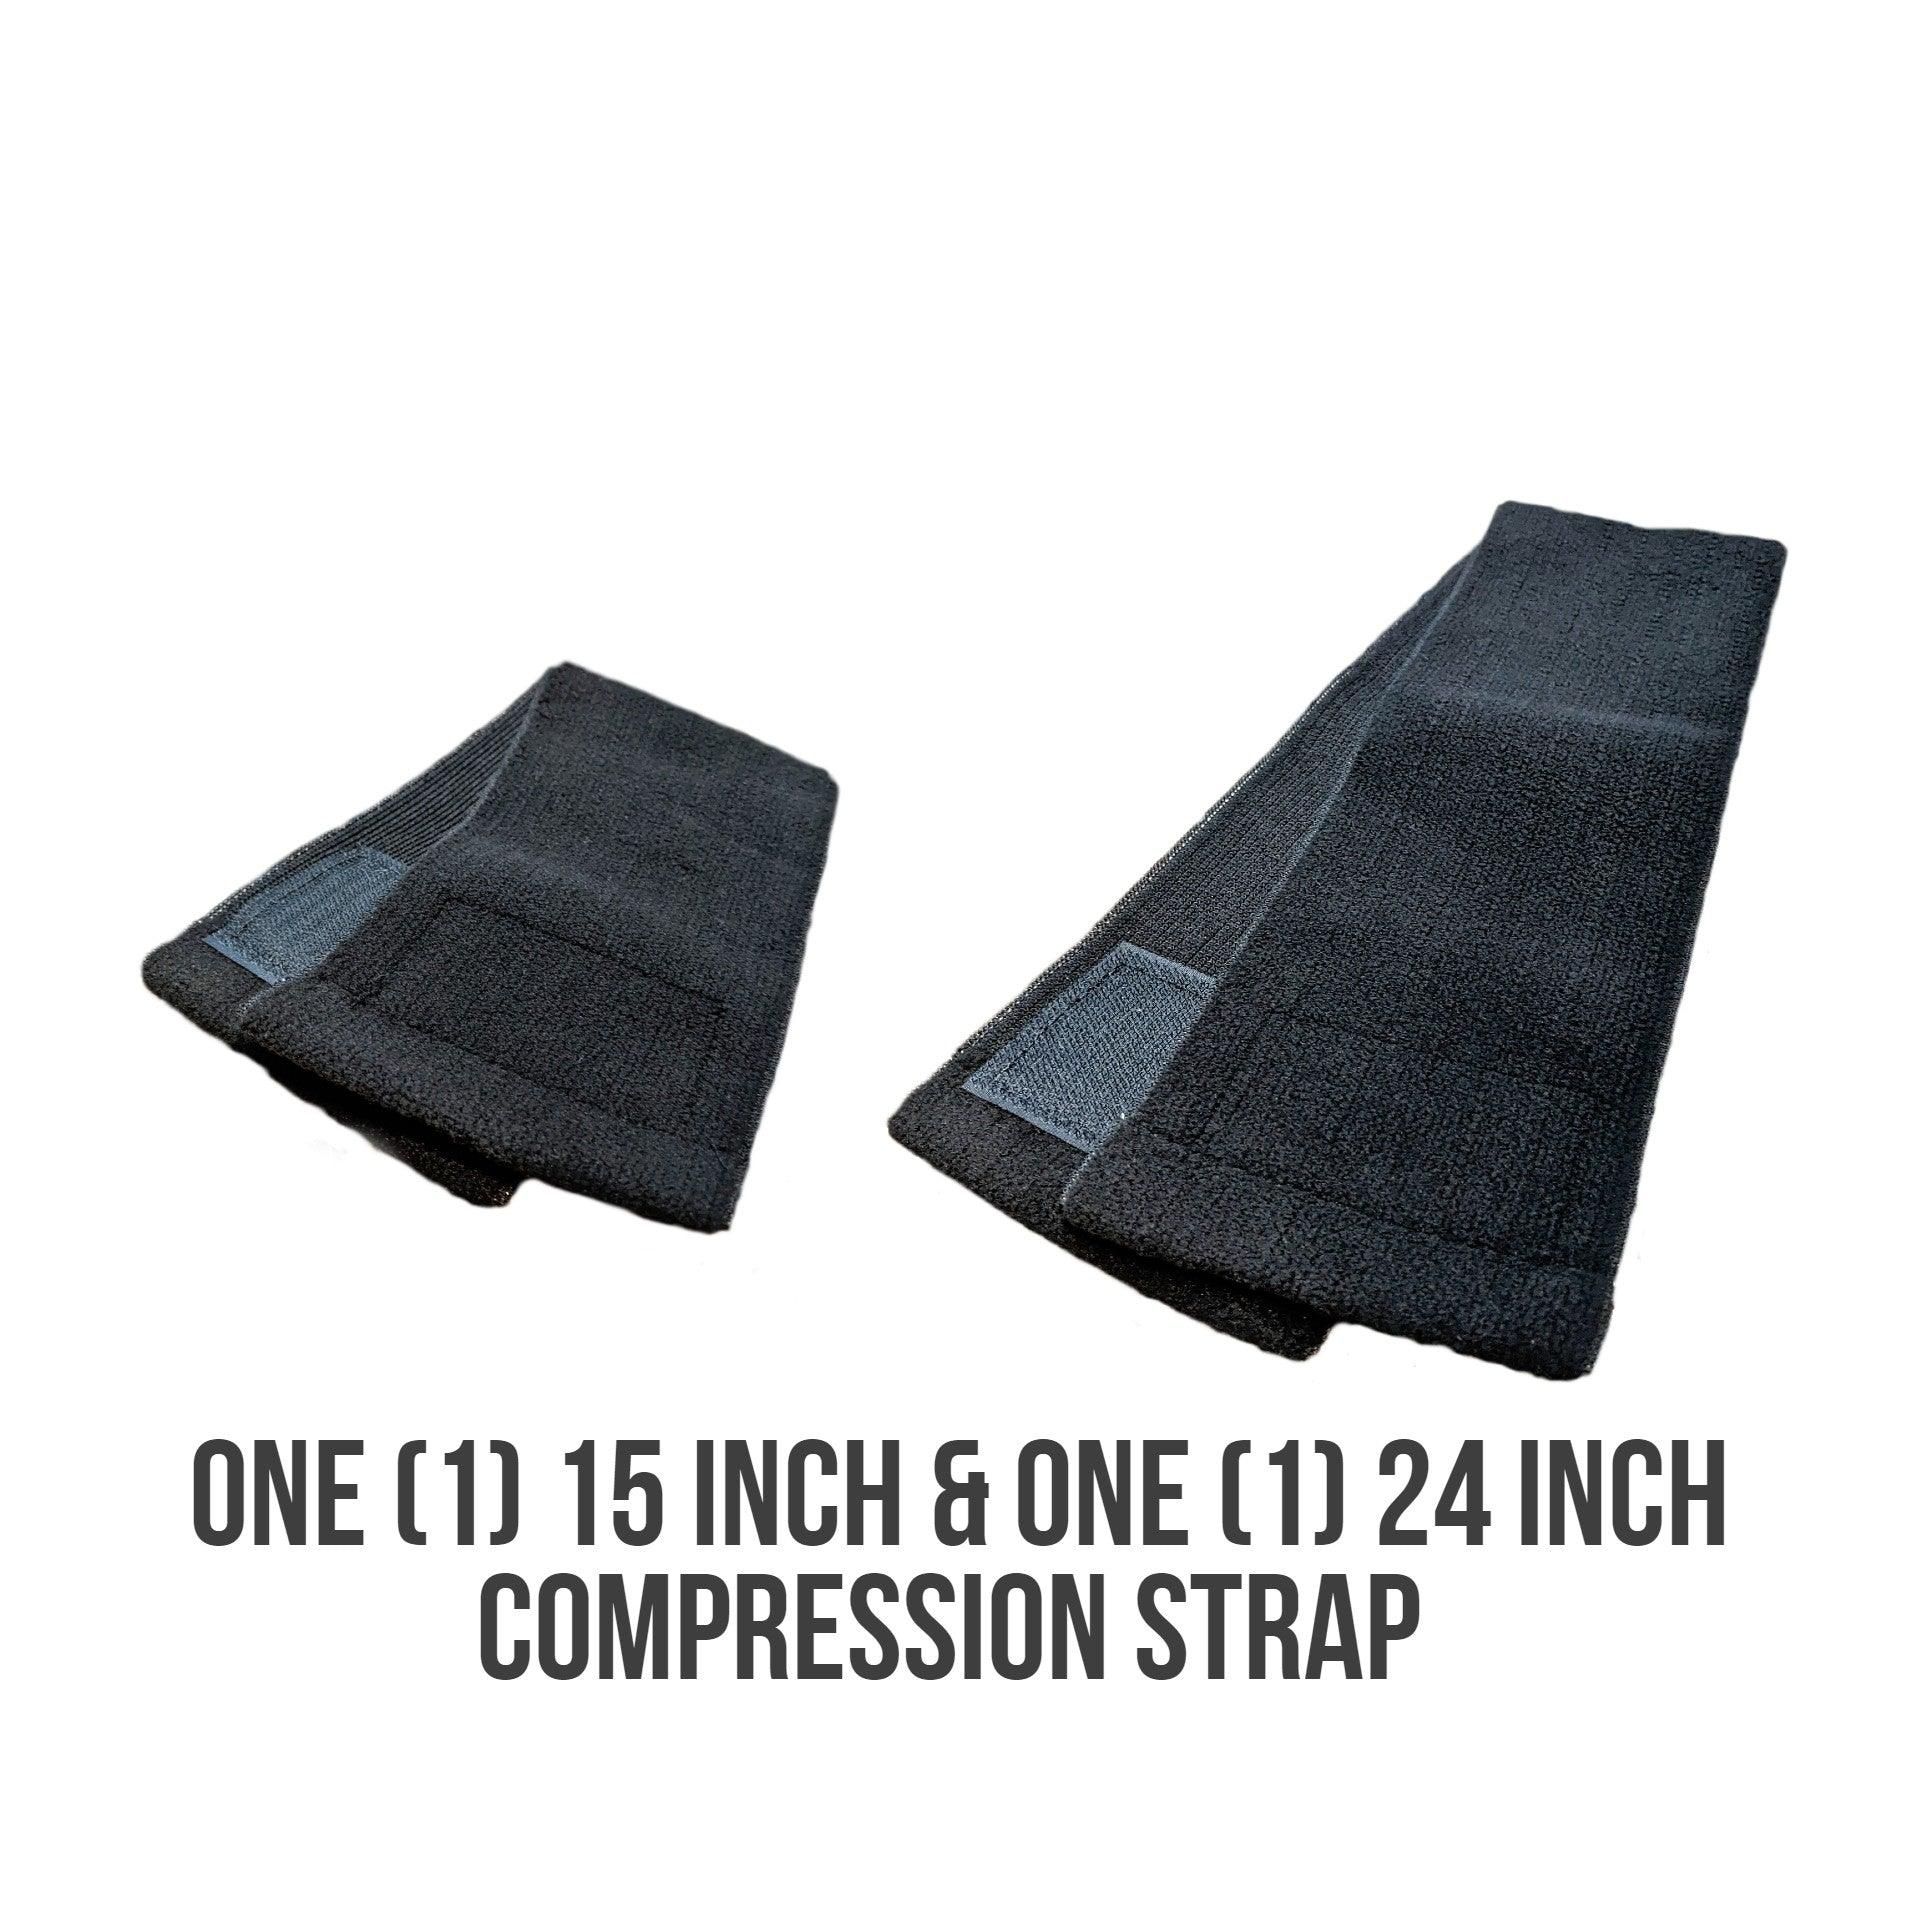 Omni Ice Premium Cold Therapy Compression Straps - CCS15-24 Omni Ice Premium Cold Therapy Compression Straps - undefined by Supply Physical Therapy Accessories, Accessory, Aircast Accessories, Best Seller, Breg, Breg Accessories, Breg Wave Accessories, Classic3 Accessories, Clear3 Accessories, Compression Straps, DonJoy, Ossur, Replacement, Straps, Wraps